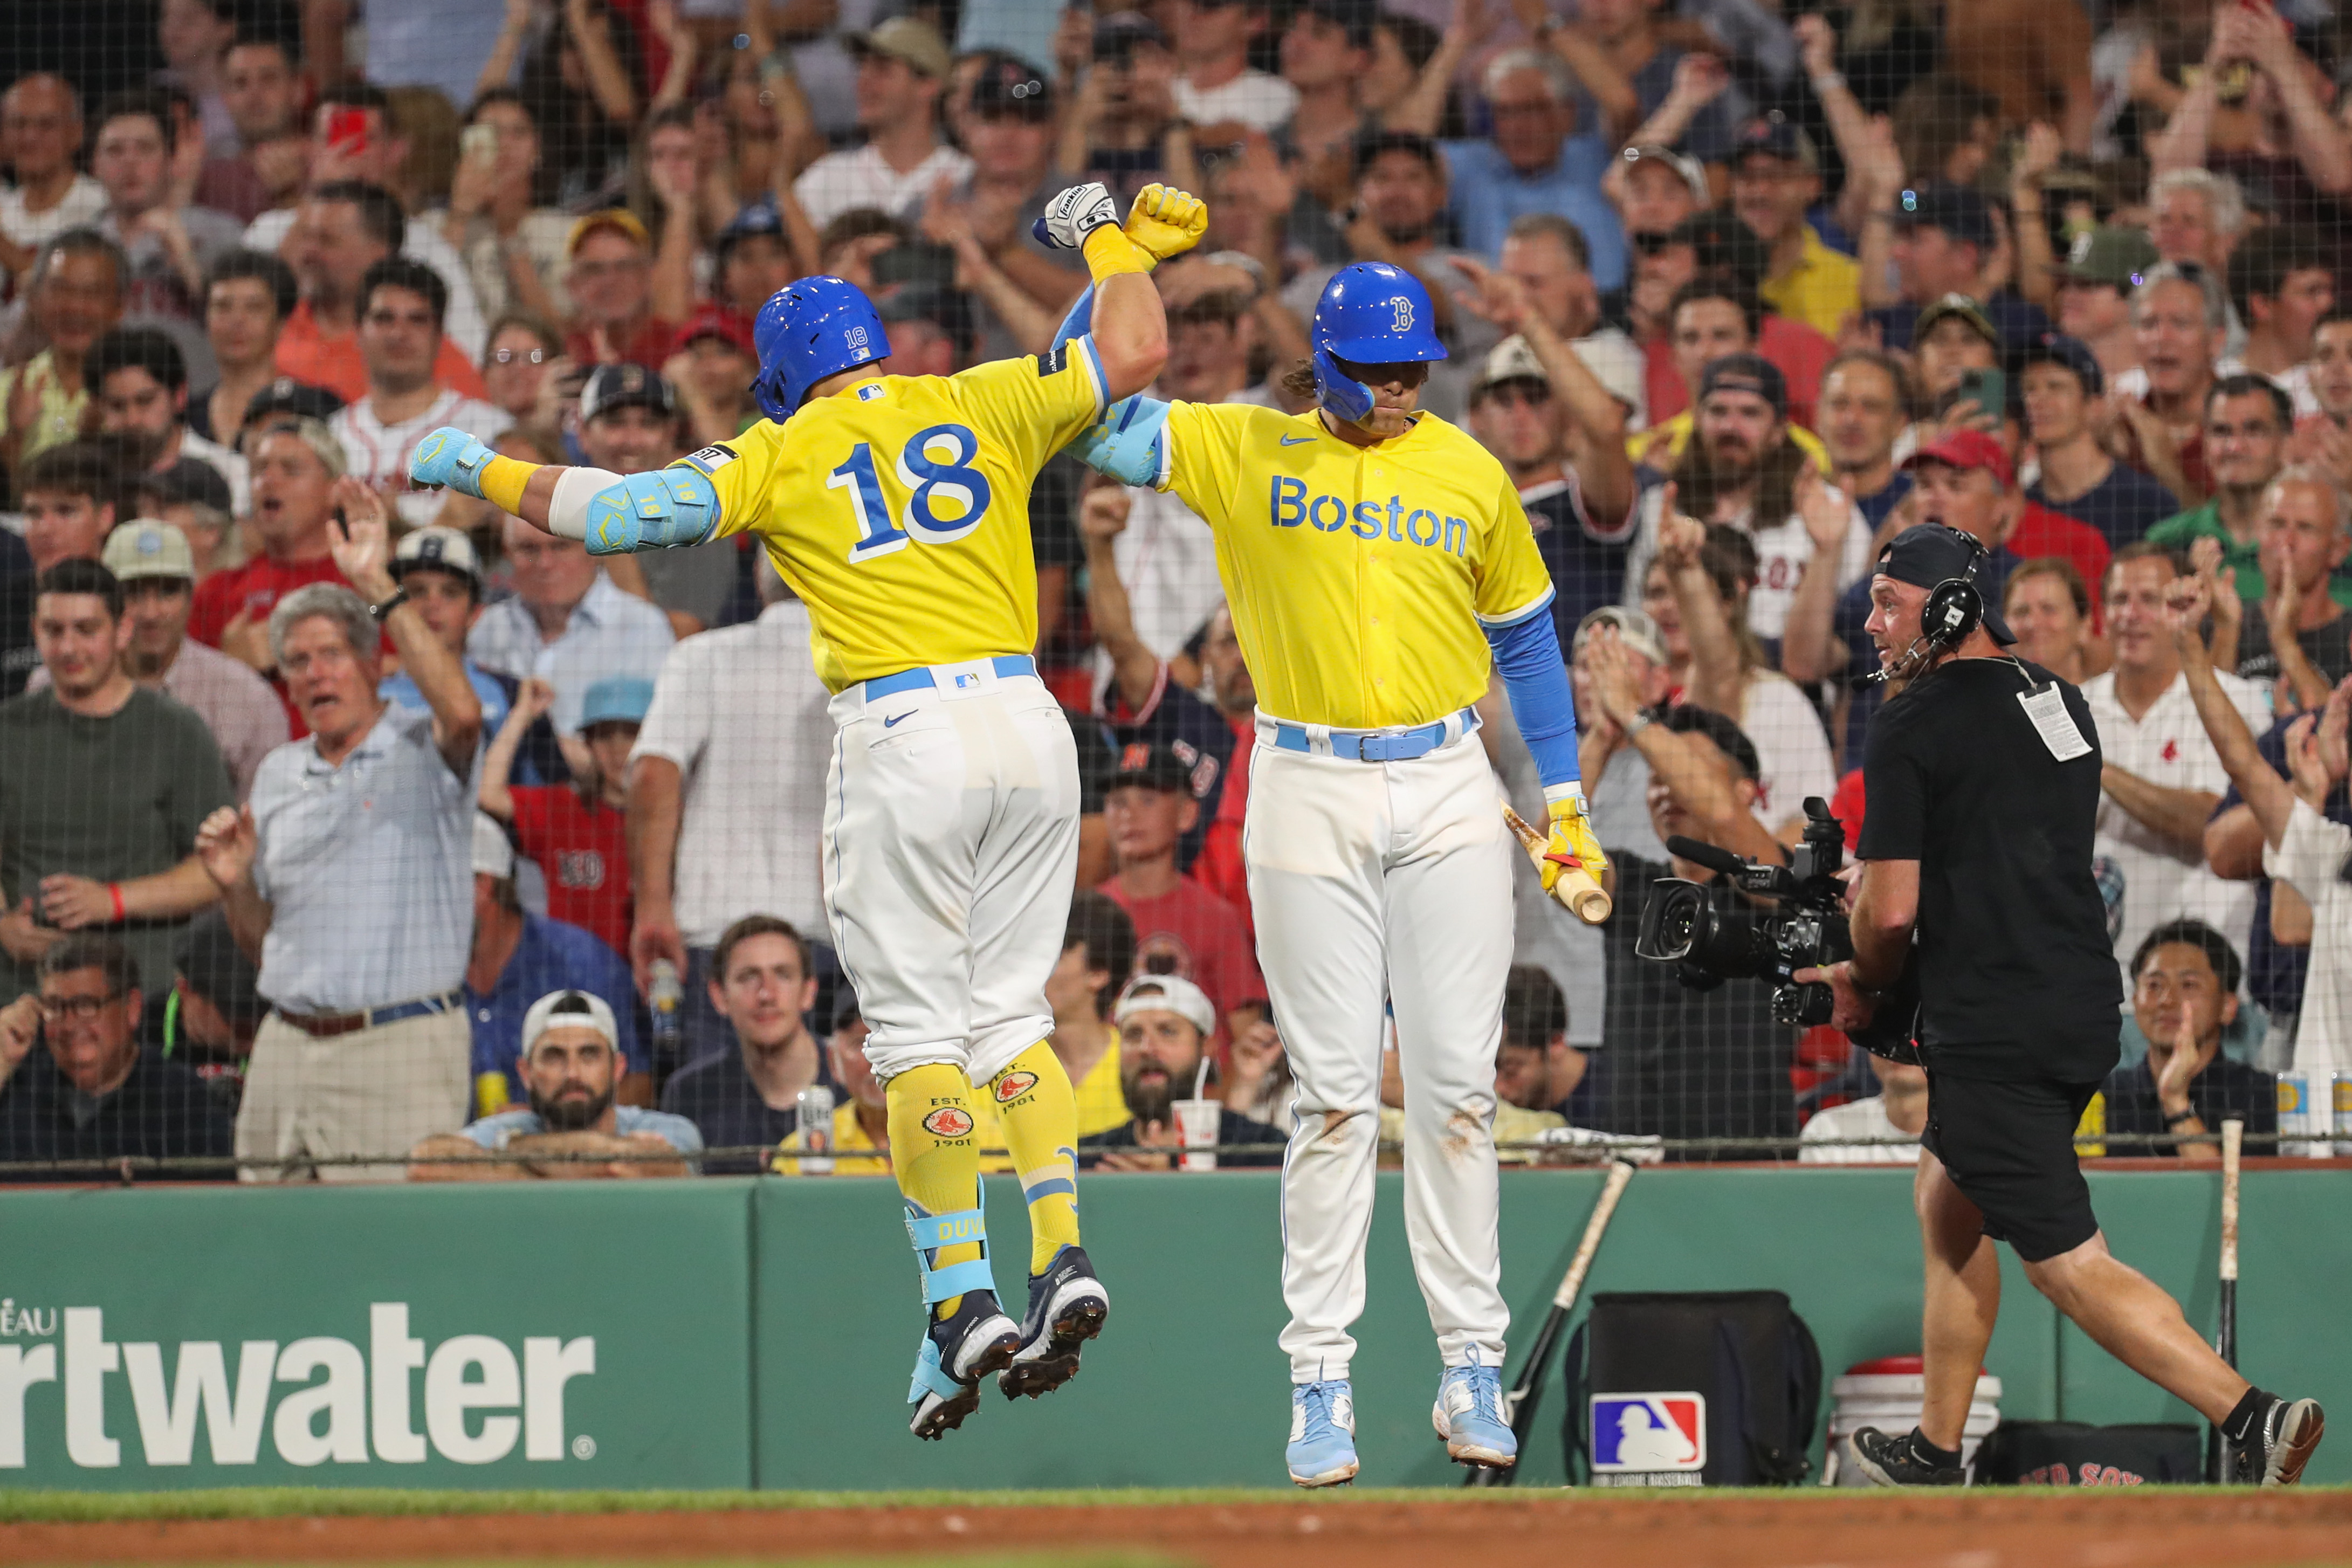 Boston Red Sox bringing back yellow and blue jerseys this week